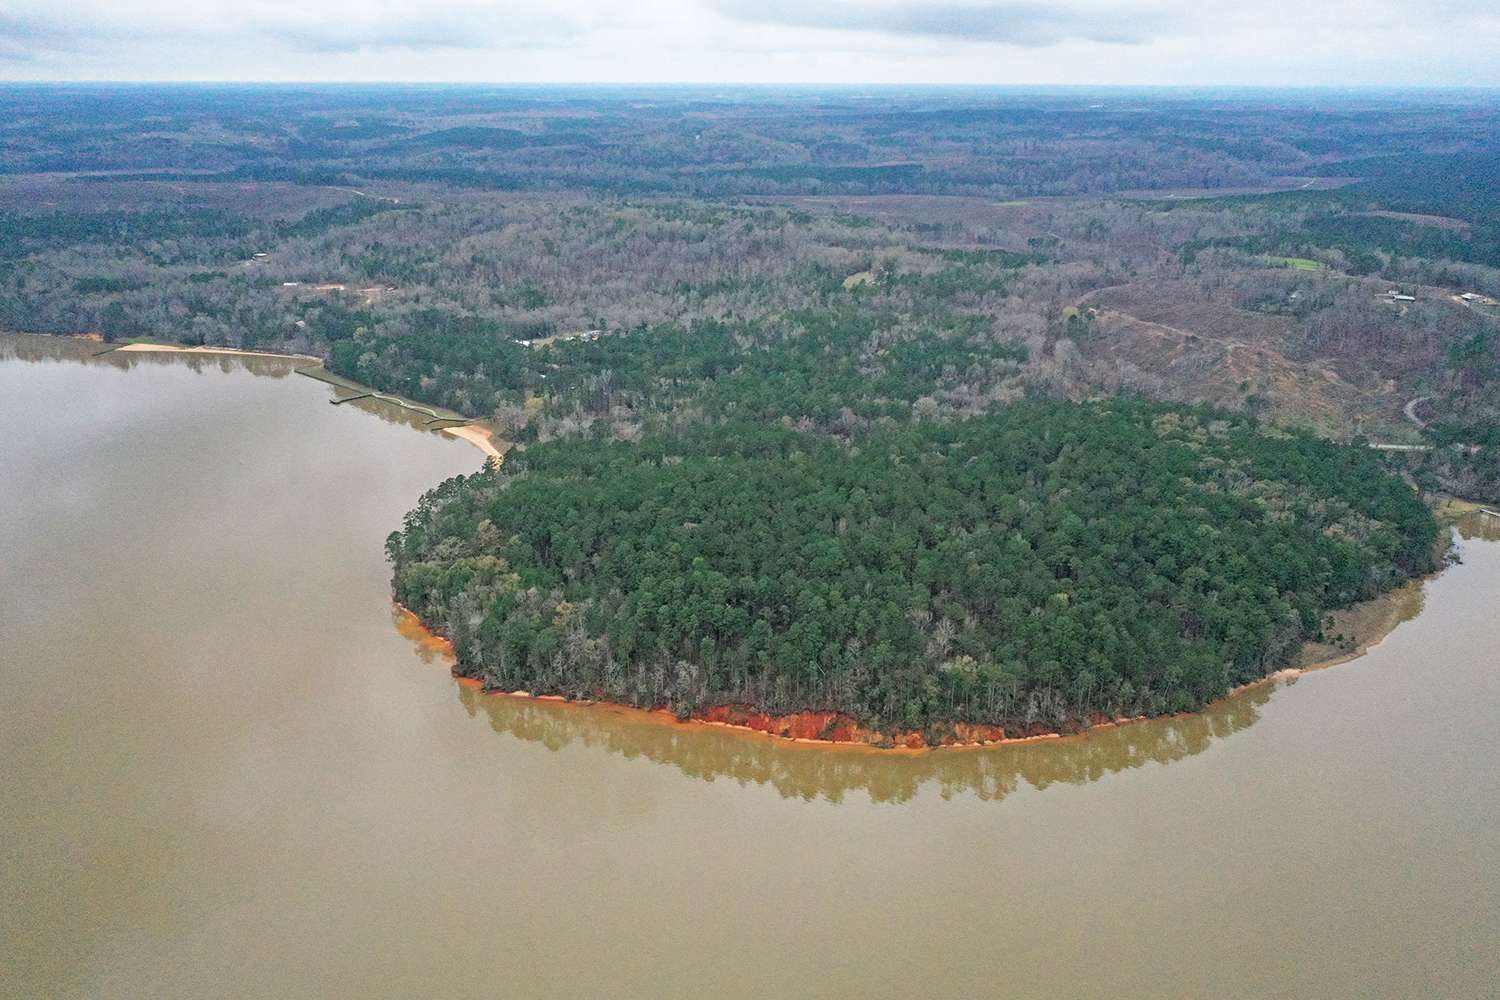 Big points with scattered stumps, brush and rocks will play a role at this event. But the classic red clay banks make obvious the location of this big southern reservoir. 